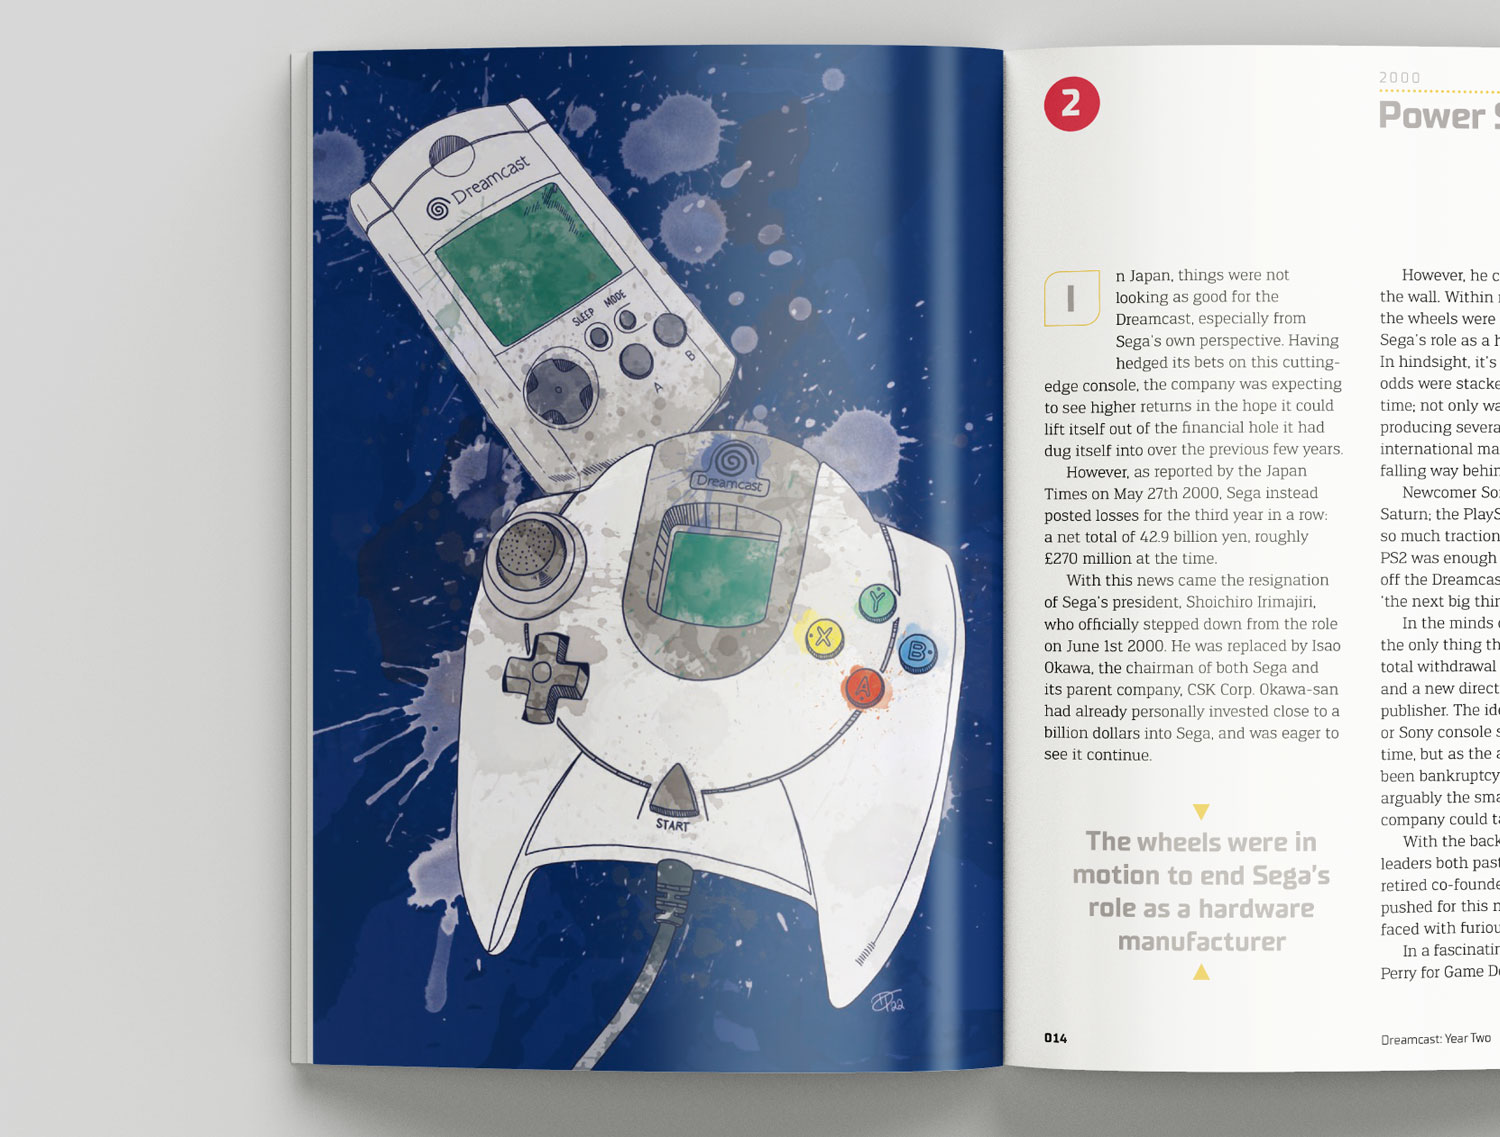 Dreamcast Year Two Book Illustrations | Peripherals Illustration Showing a Controller and VMU